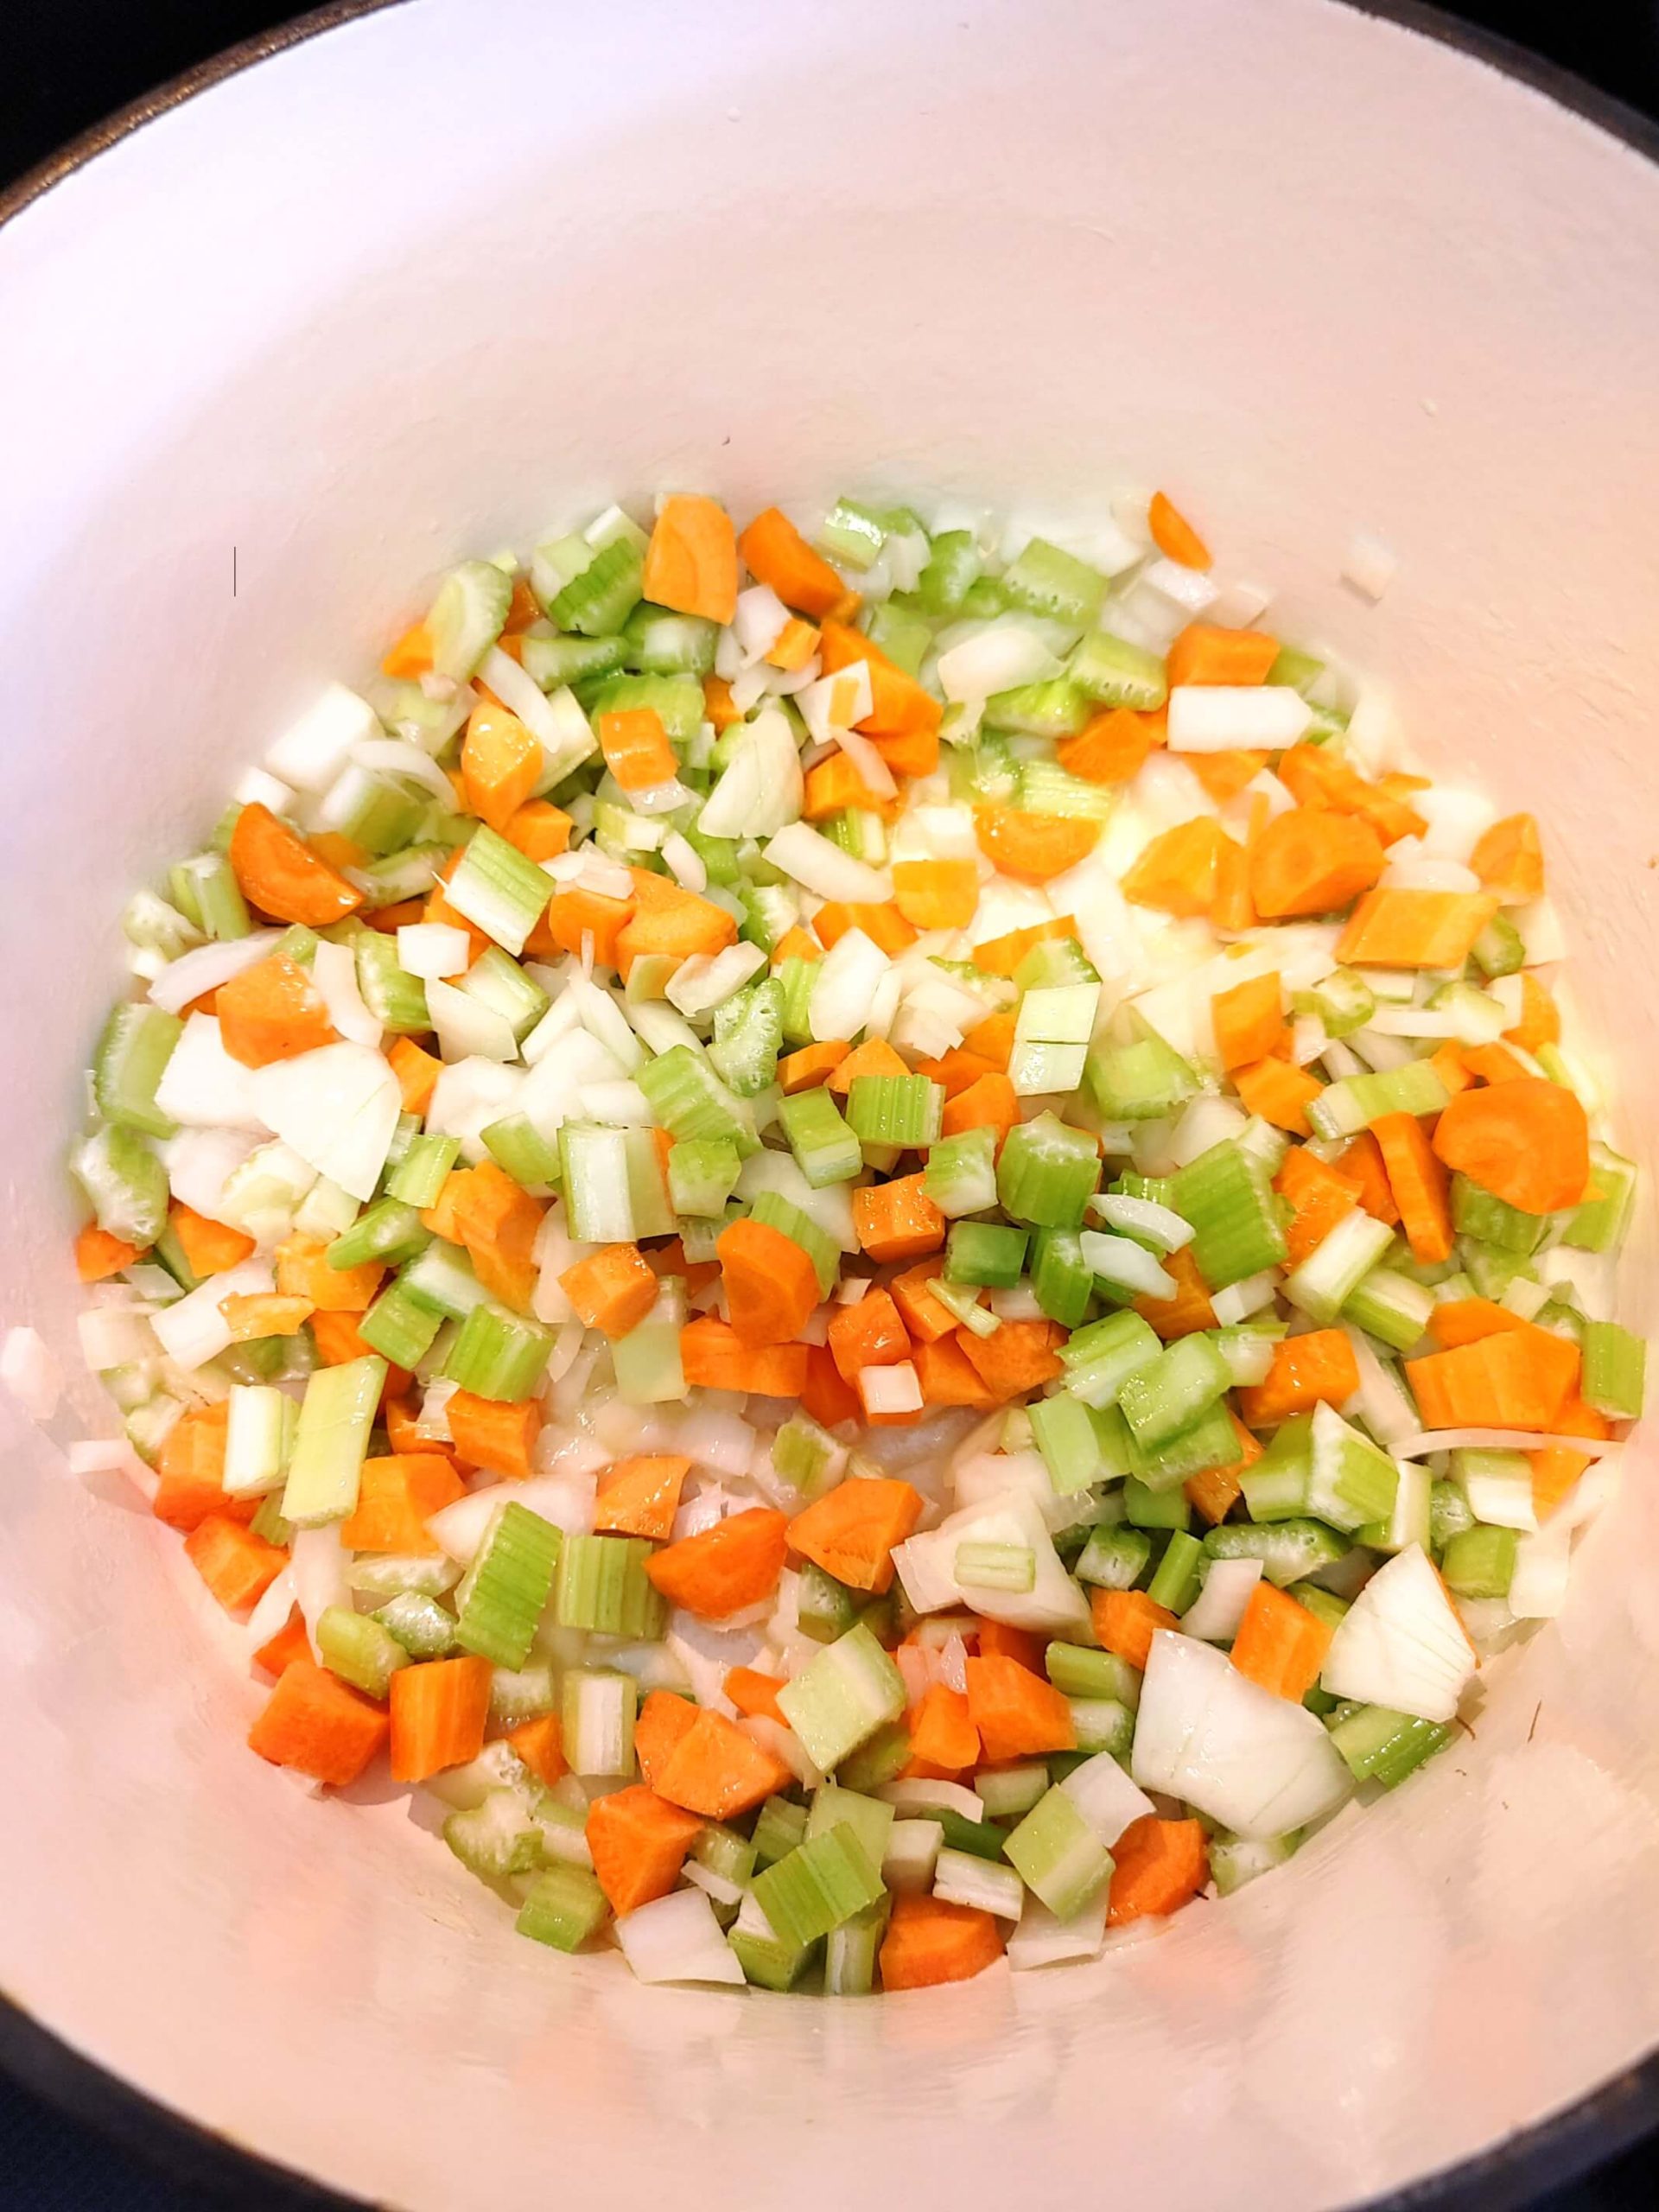 CHOP THE ONIONS, CARROTS, AND CELERY